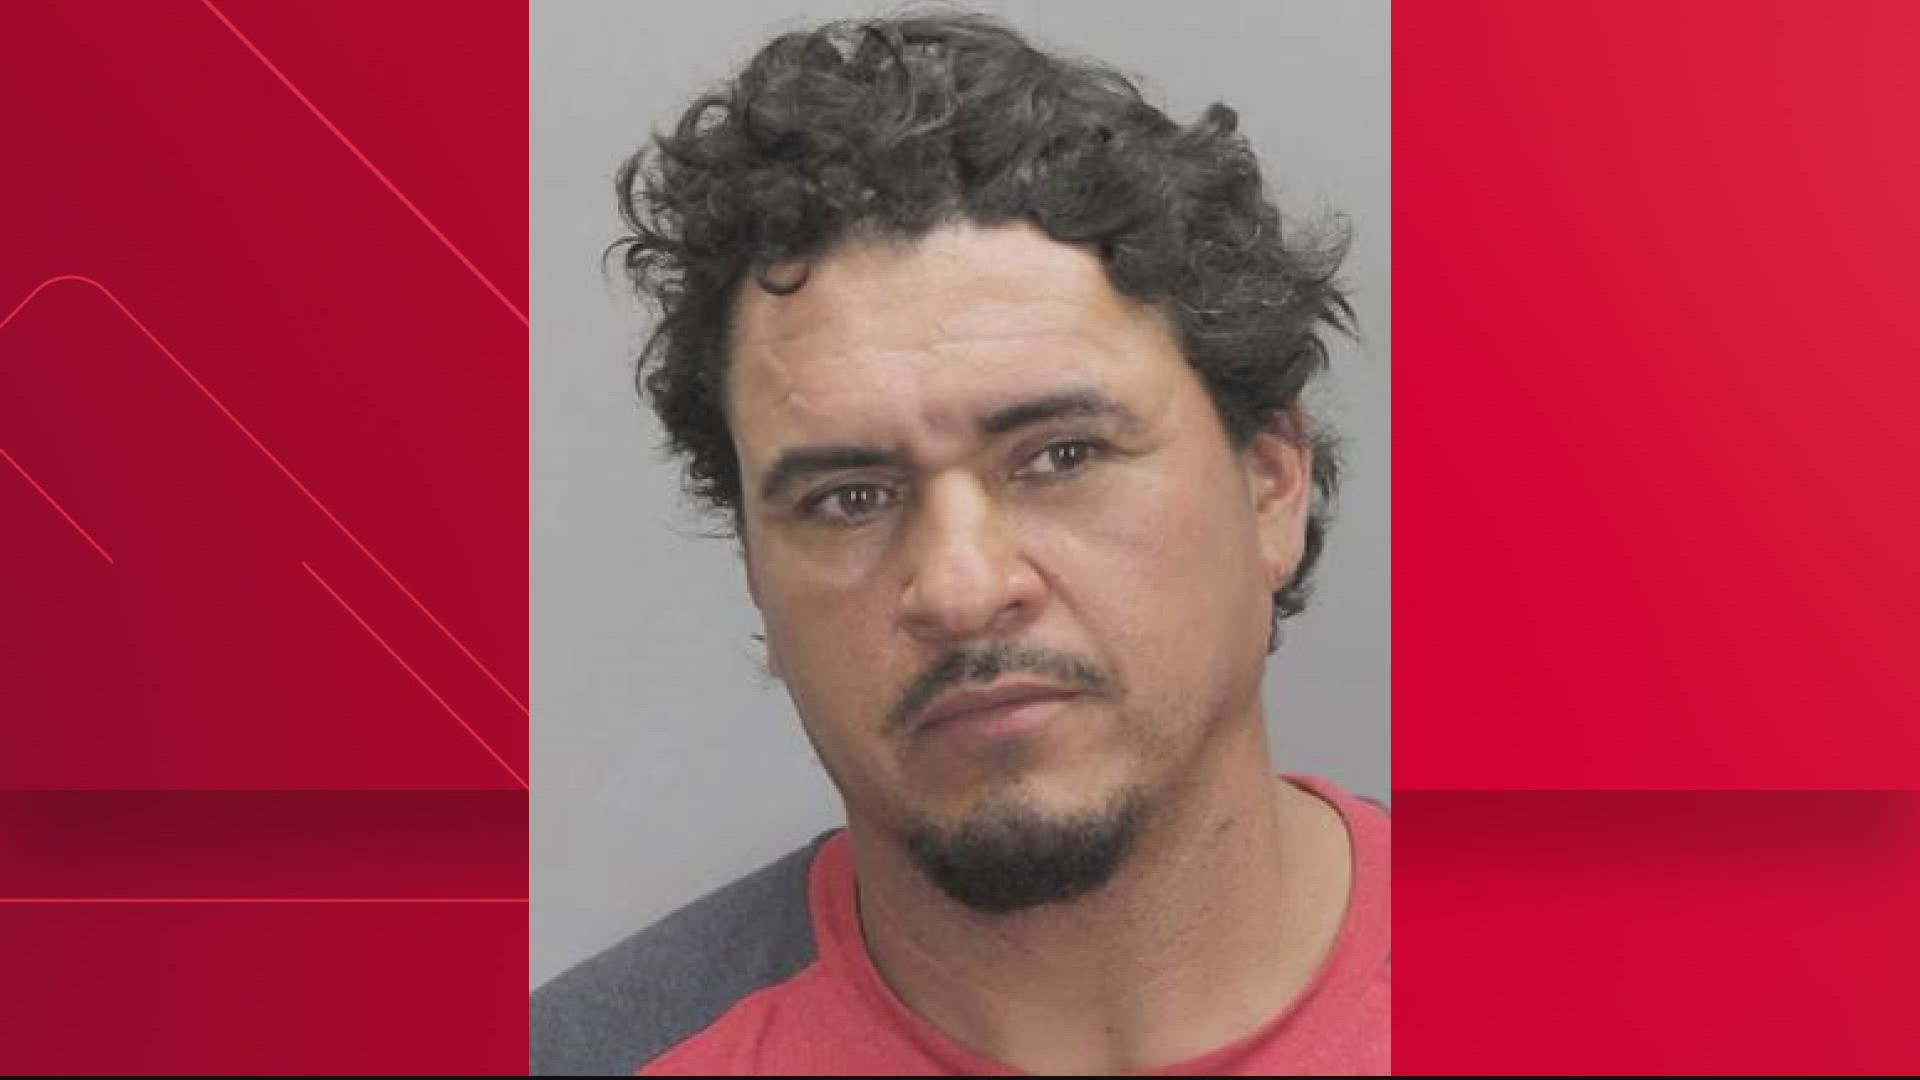 42-year-old Juan Alfaro Rodriguez was arrested for warrants from another state, and then charged with an additional 3 counts of indecent exposure.